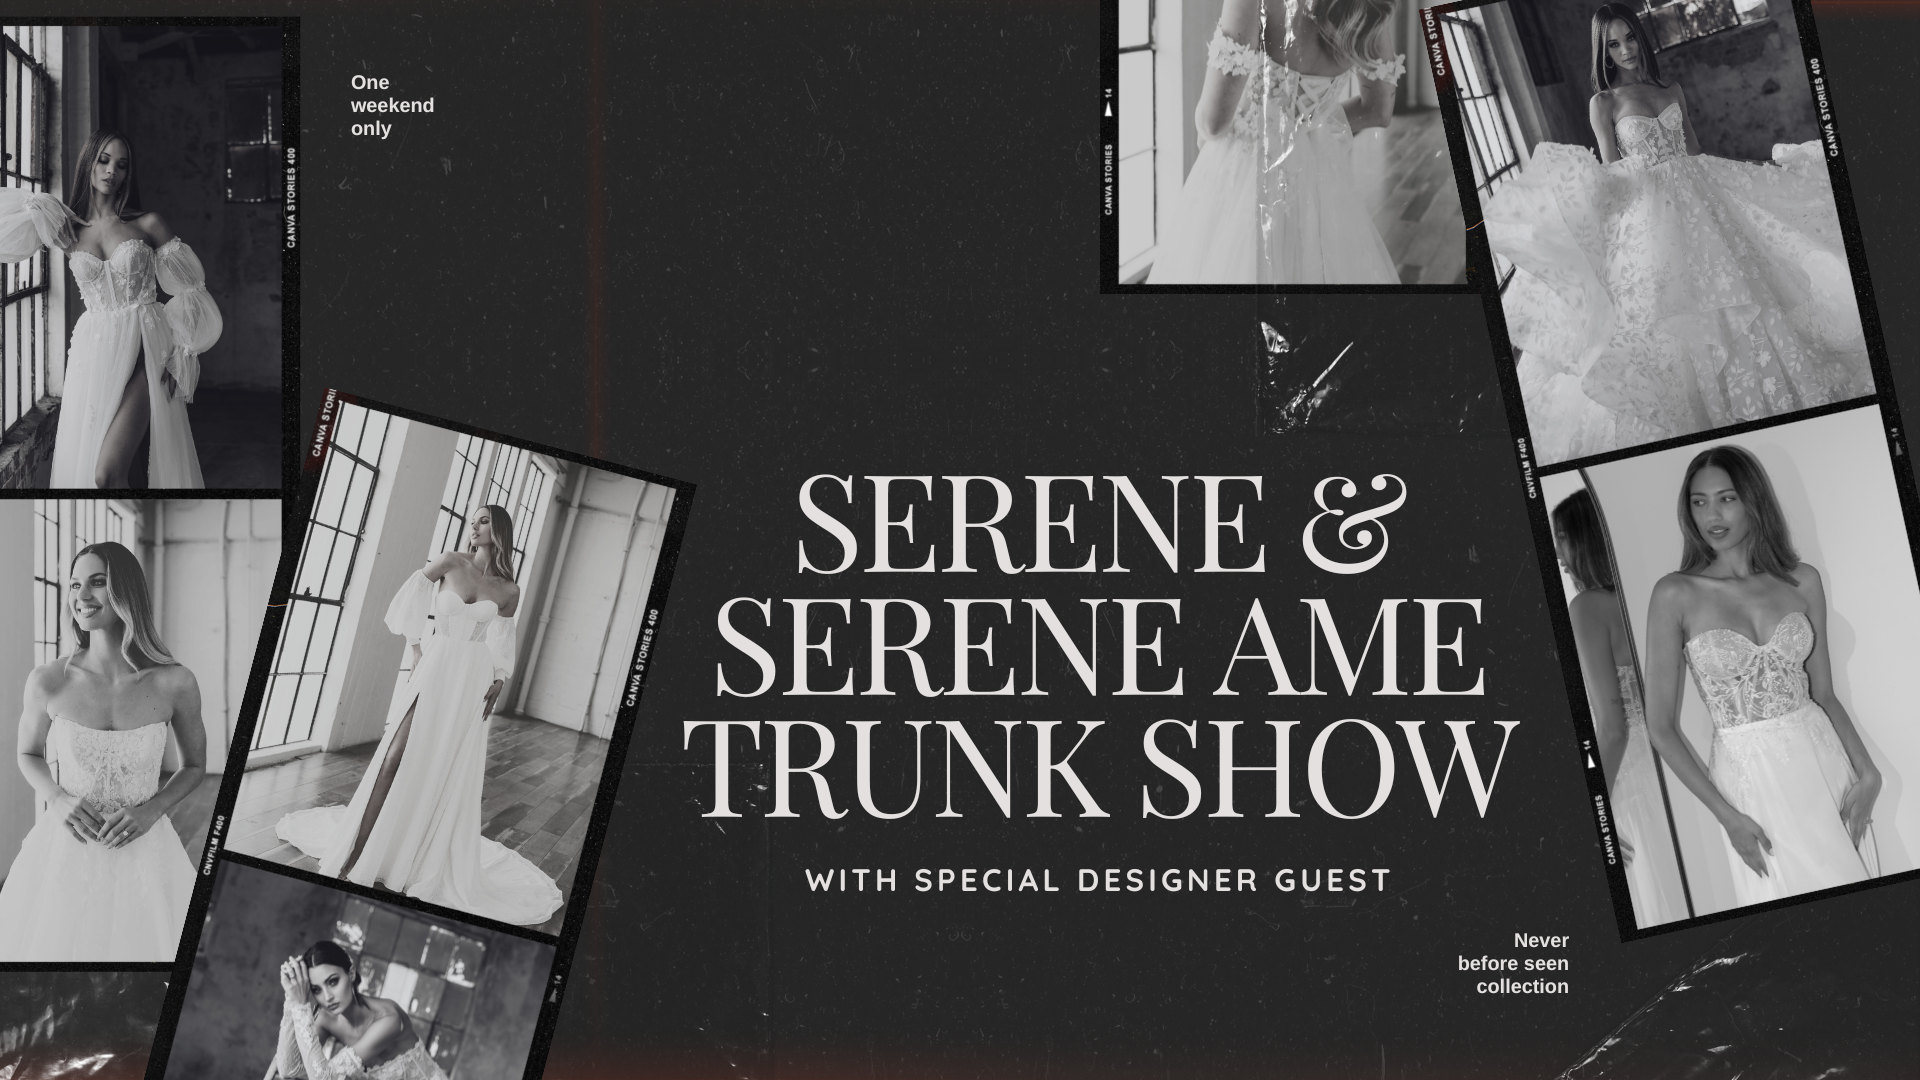 Serene and Serene Ame Trunk Show Image